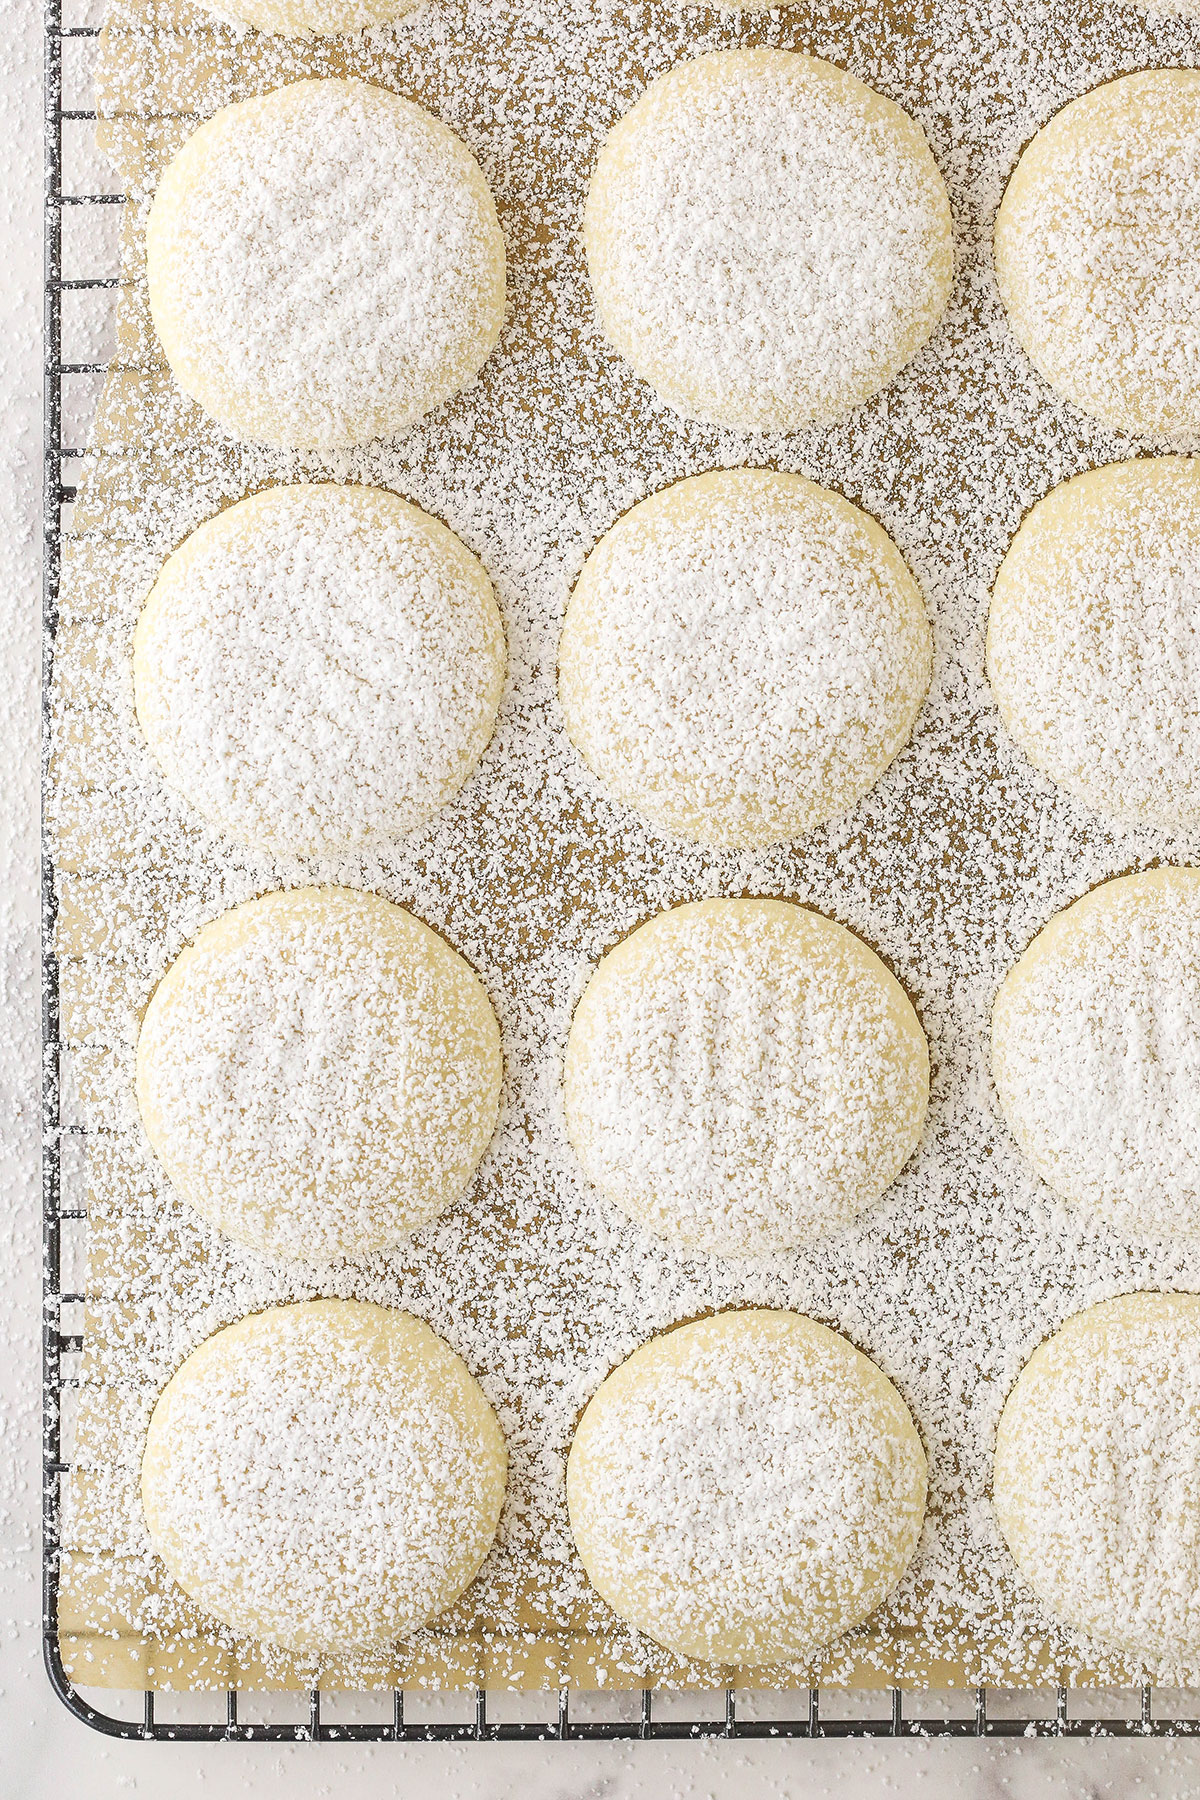 A bird's-eye view of a batch of vanilla butter cookies on a wire rack with a sheet of parchment paper underneath the cookies